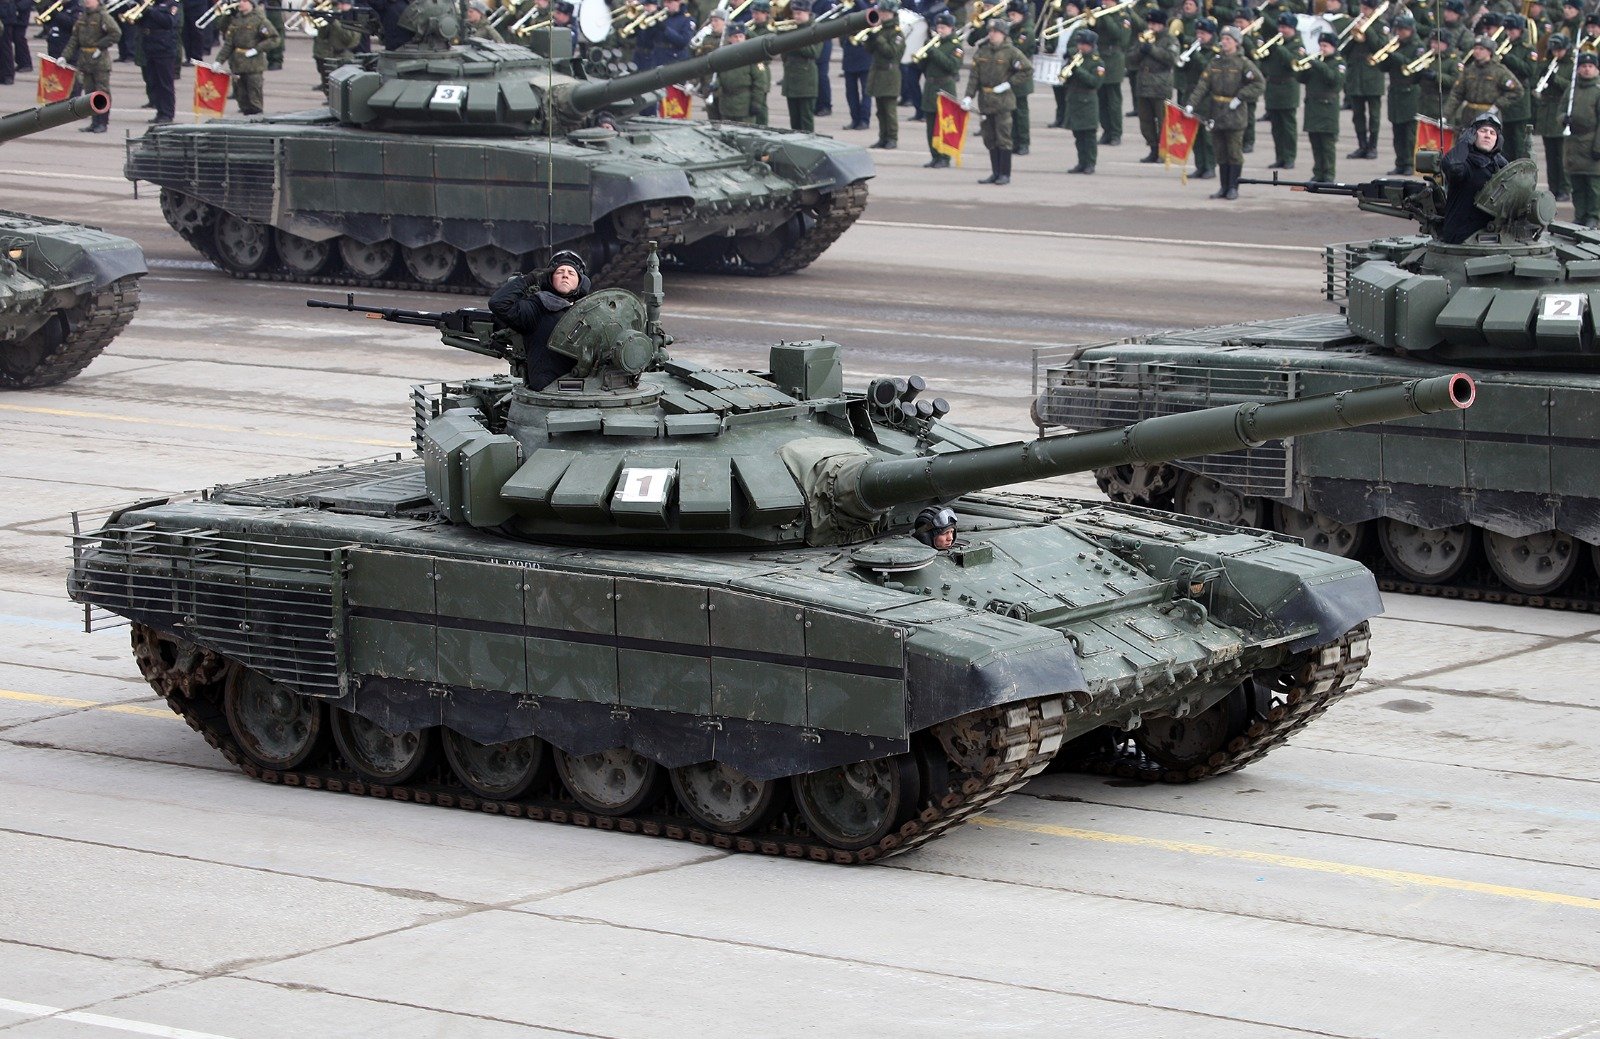 meet-russia-s-old-t-72-tank-it-literally-is-everywhere-the-national